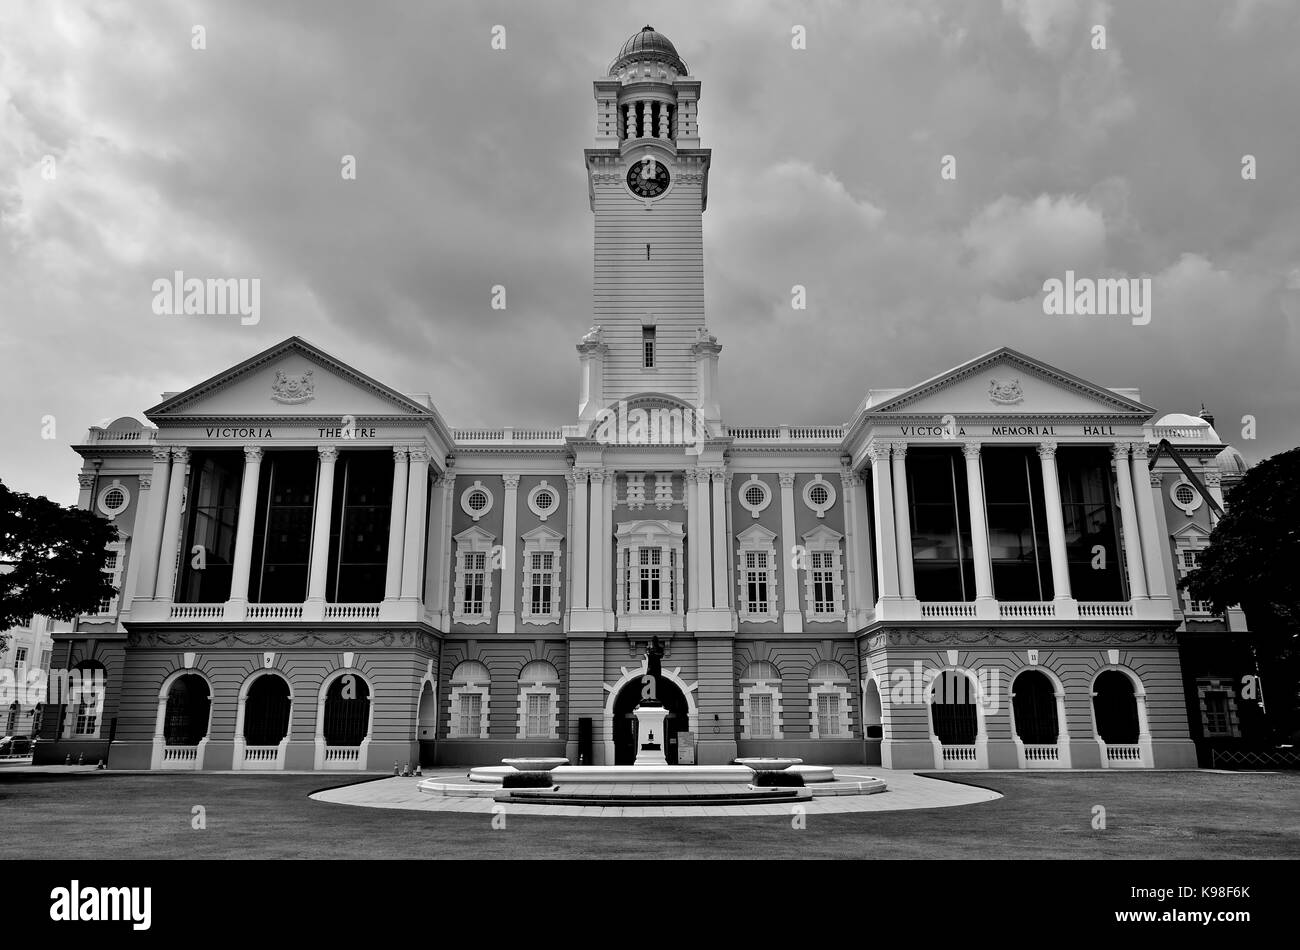 Clock tower and facade of the Victoria Memorial Hall, Singapore Stock Photo